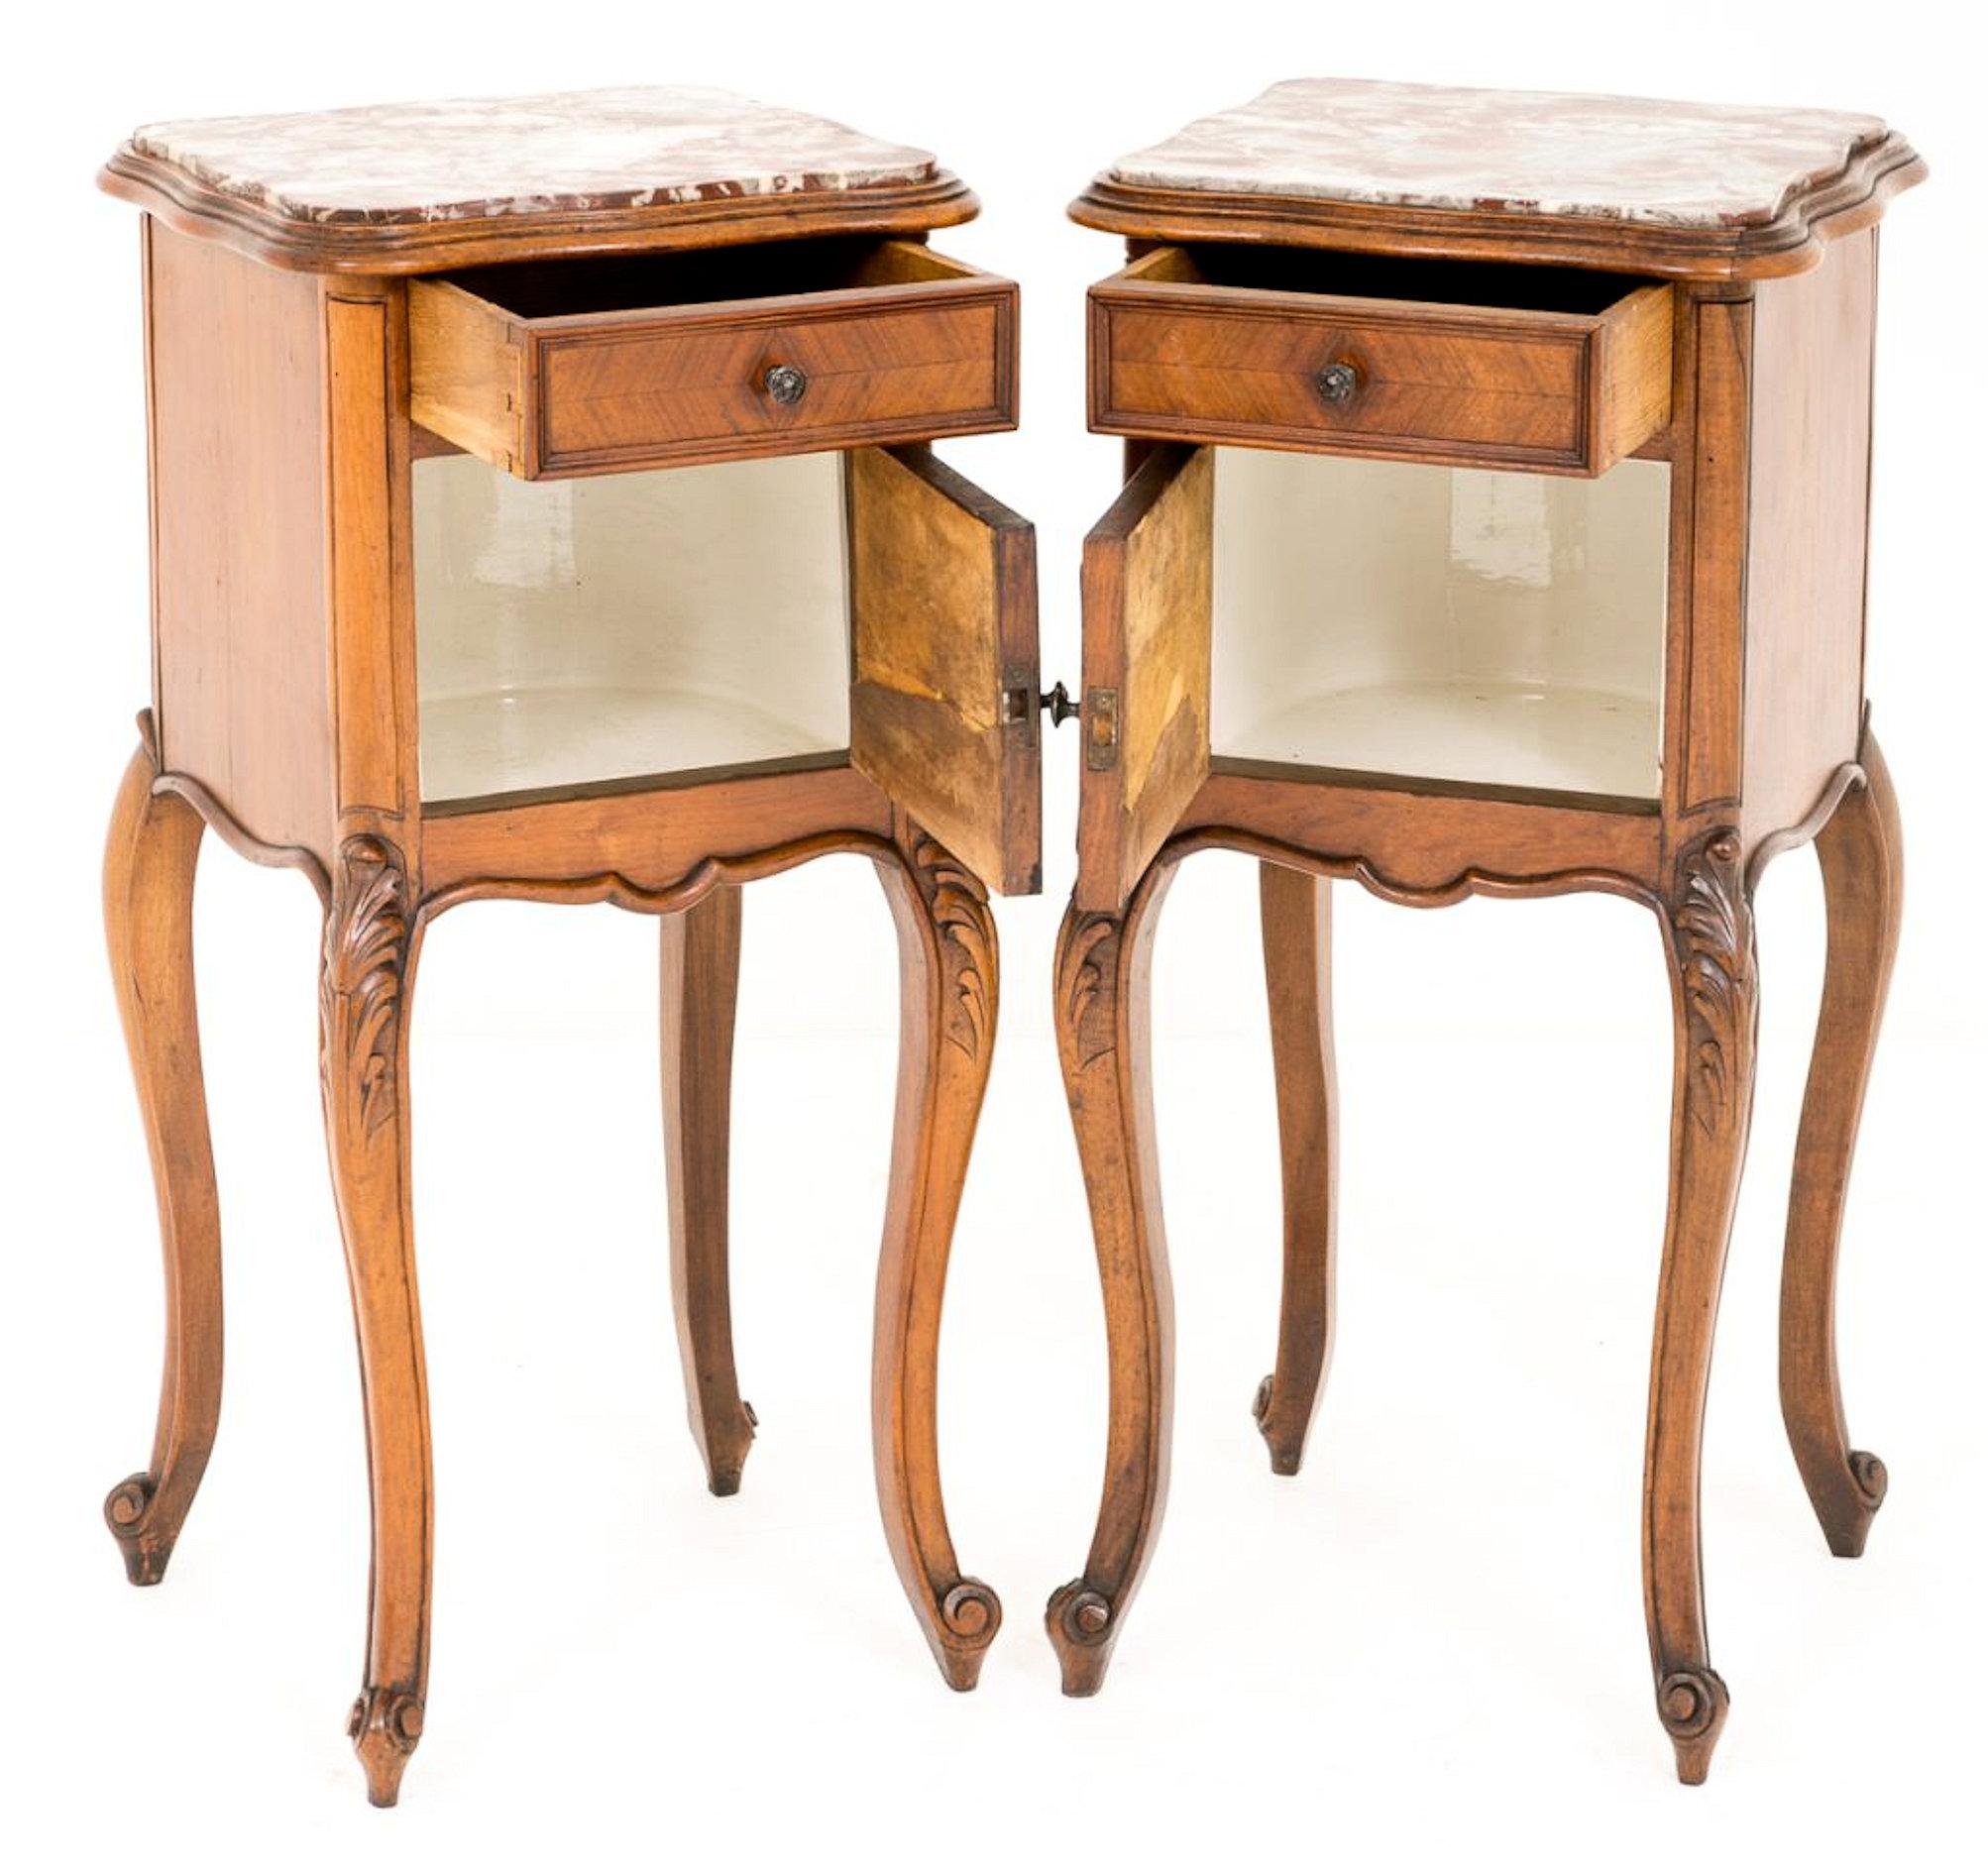 This lovely and well-proportioned pair of French walnut bedside cabinets features a single top drawer with a porcelain lined interior inside the cabinet. Each unit is supported on gracefully shaped cabriole with carvings to the knees and feet. The